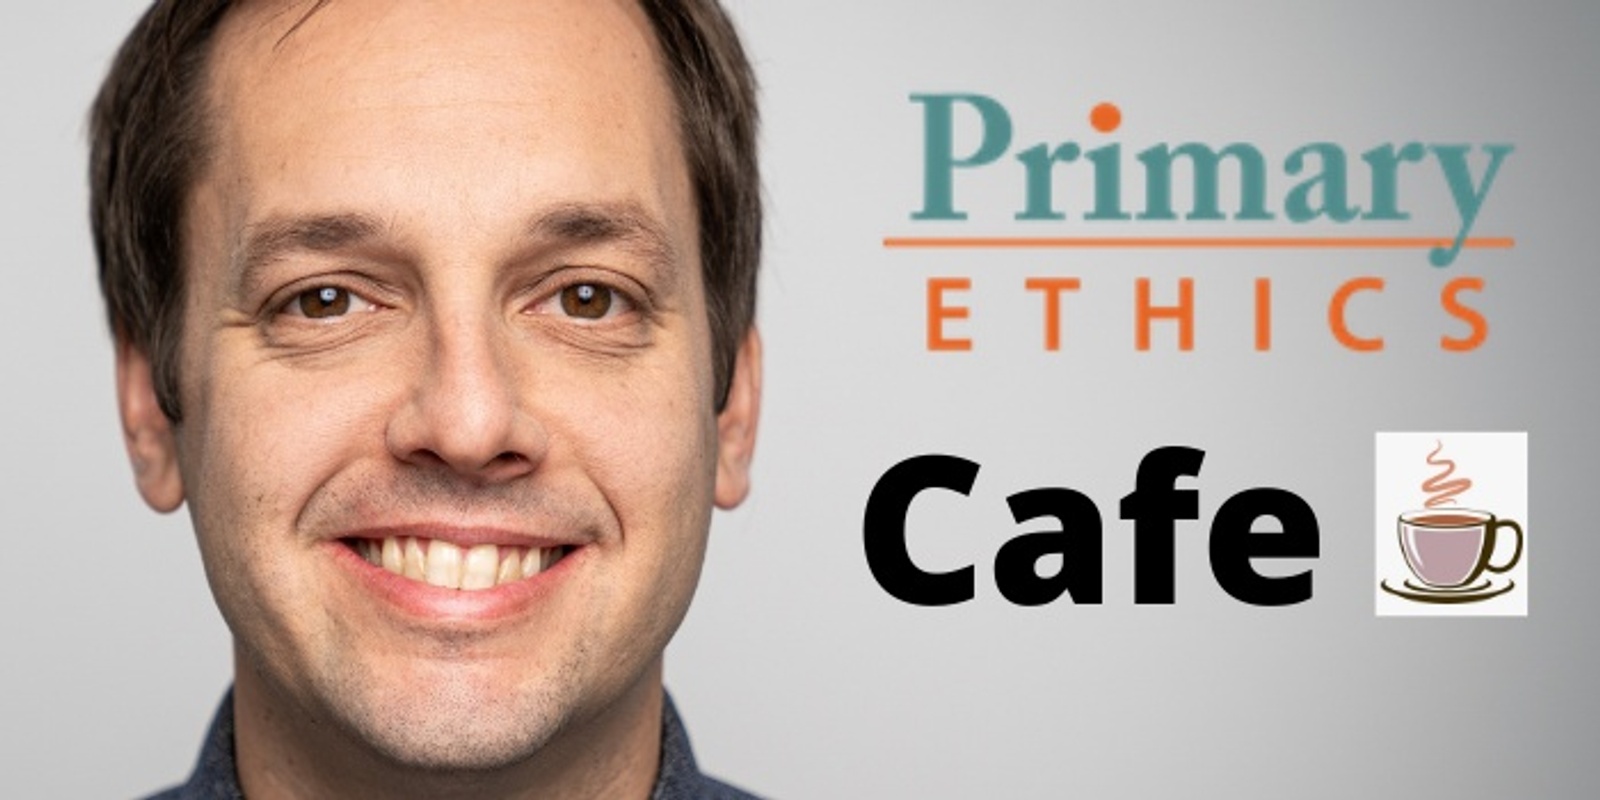 Banner image for Primary Ethics Cafe: The meaning of life